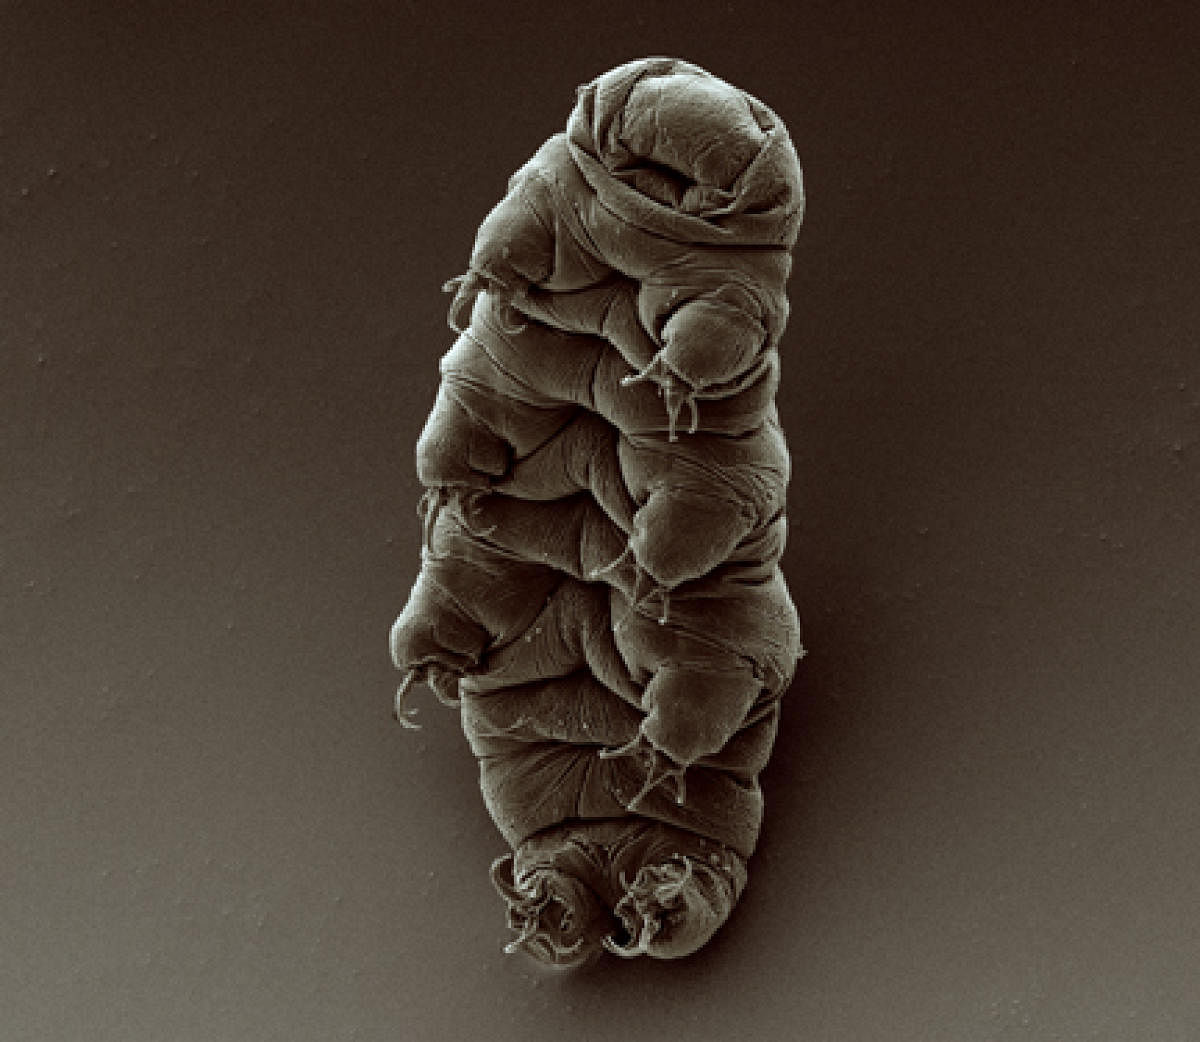 There are ‘water bears’ all around us